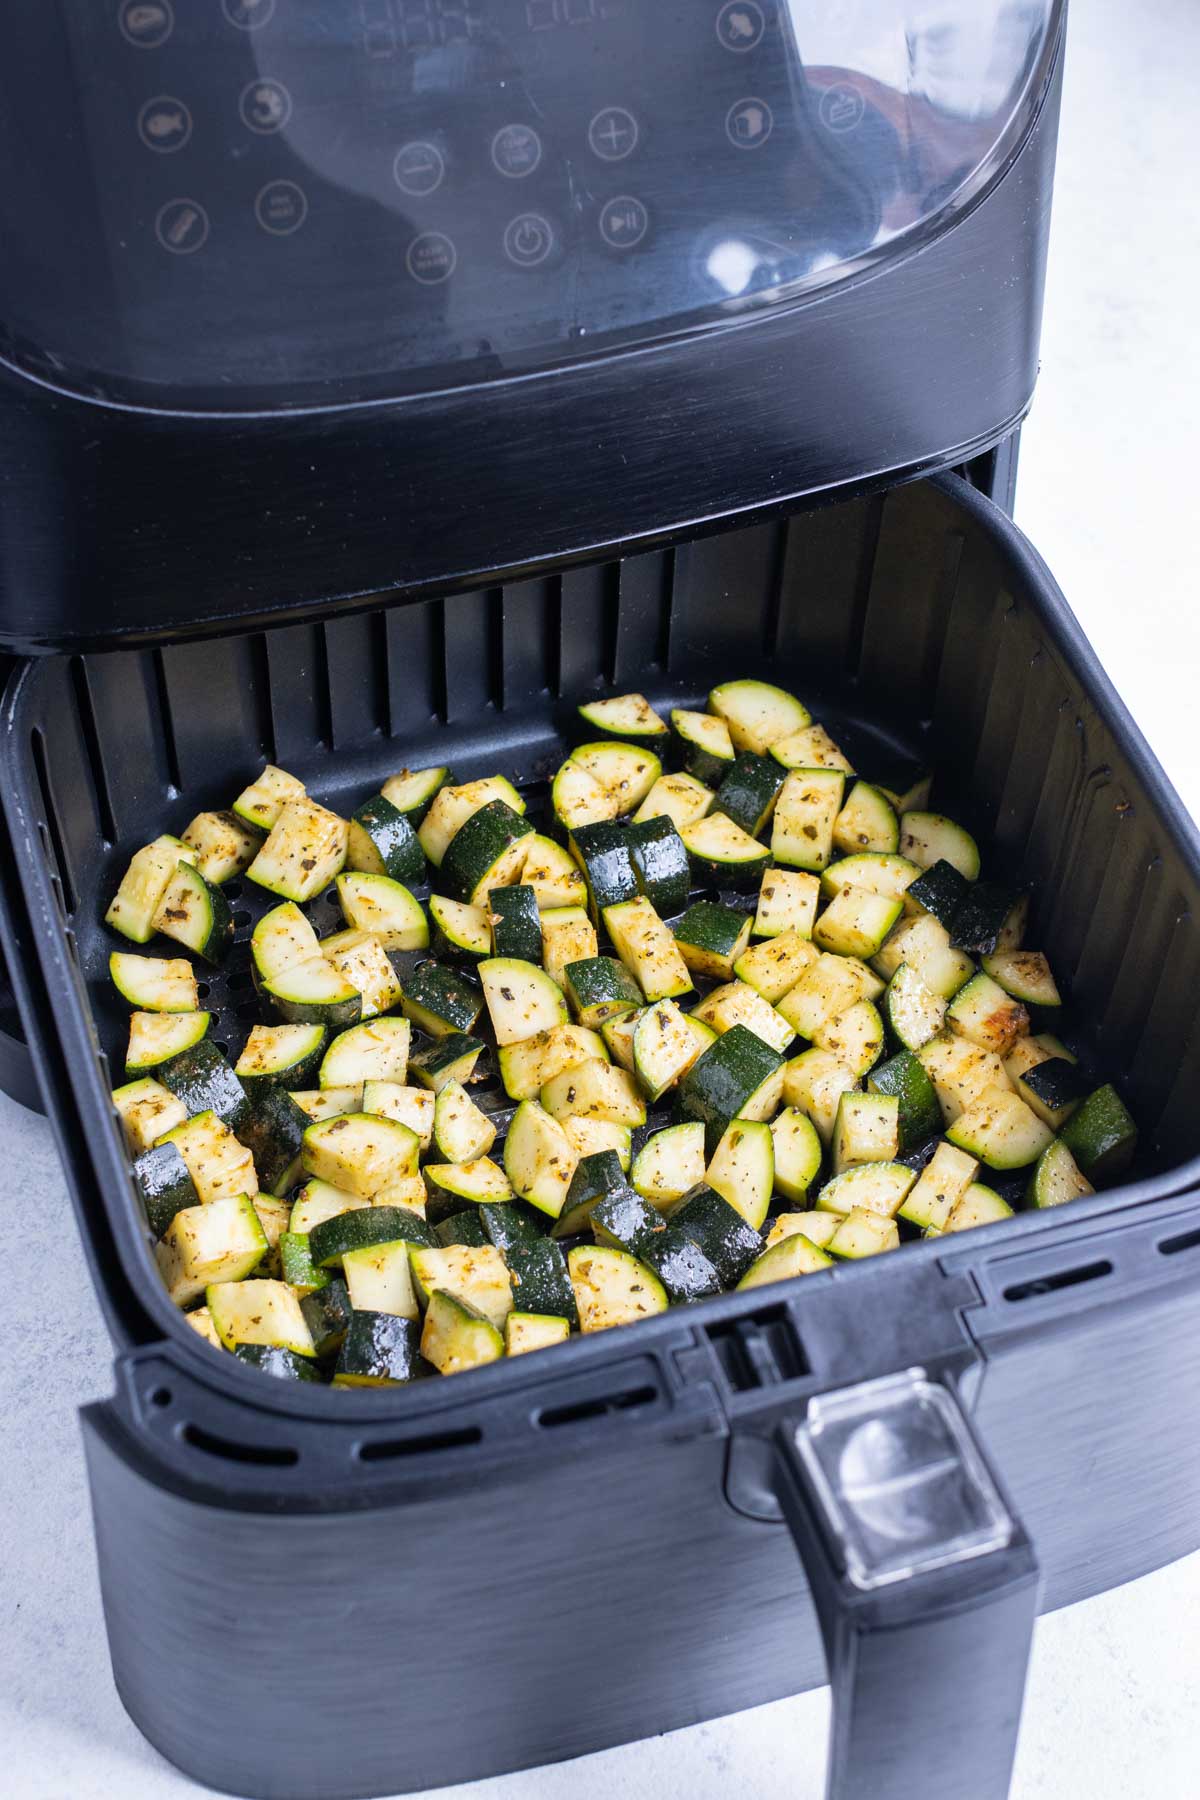 An air fryer basket with a single layer of zucchini pieces.